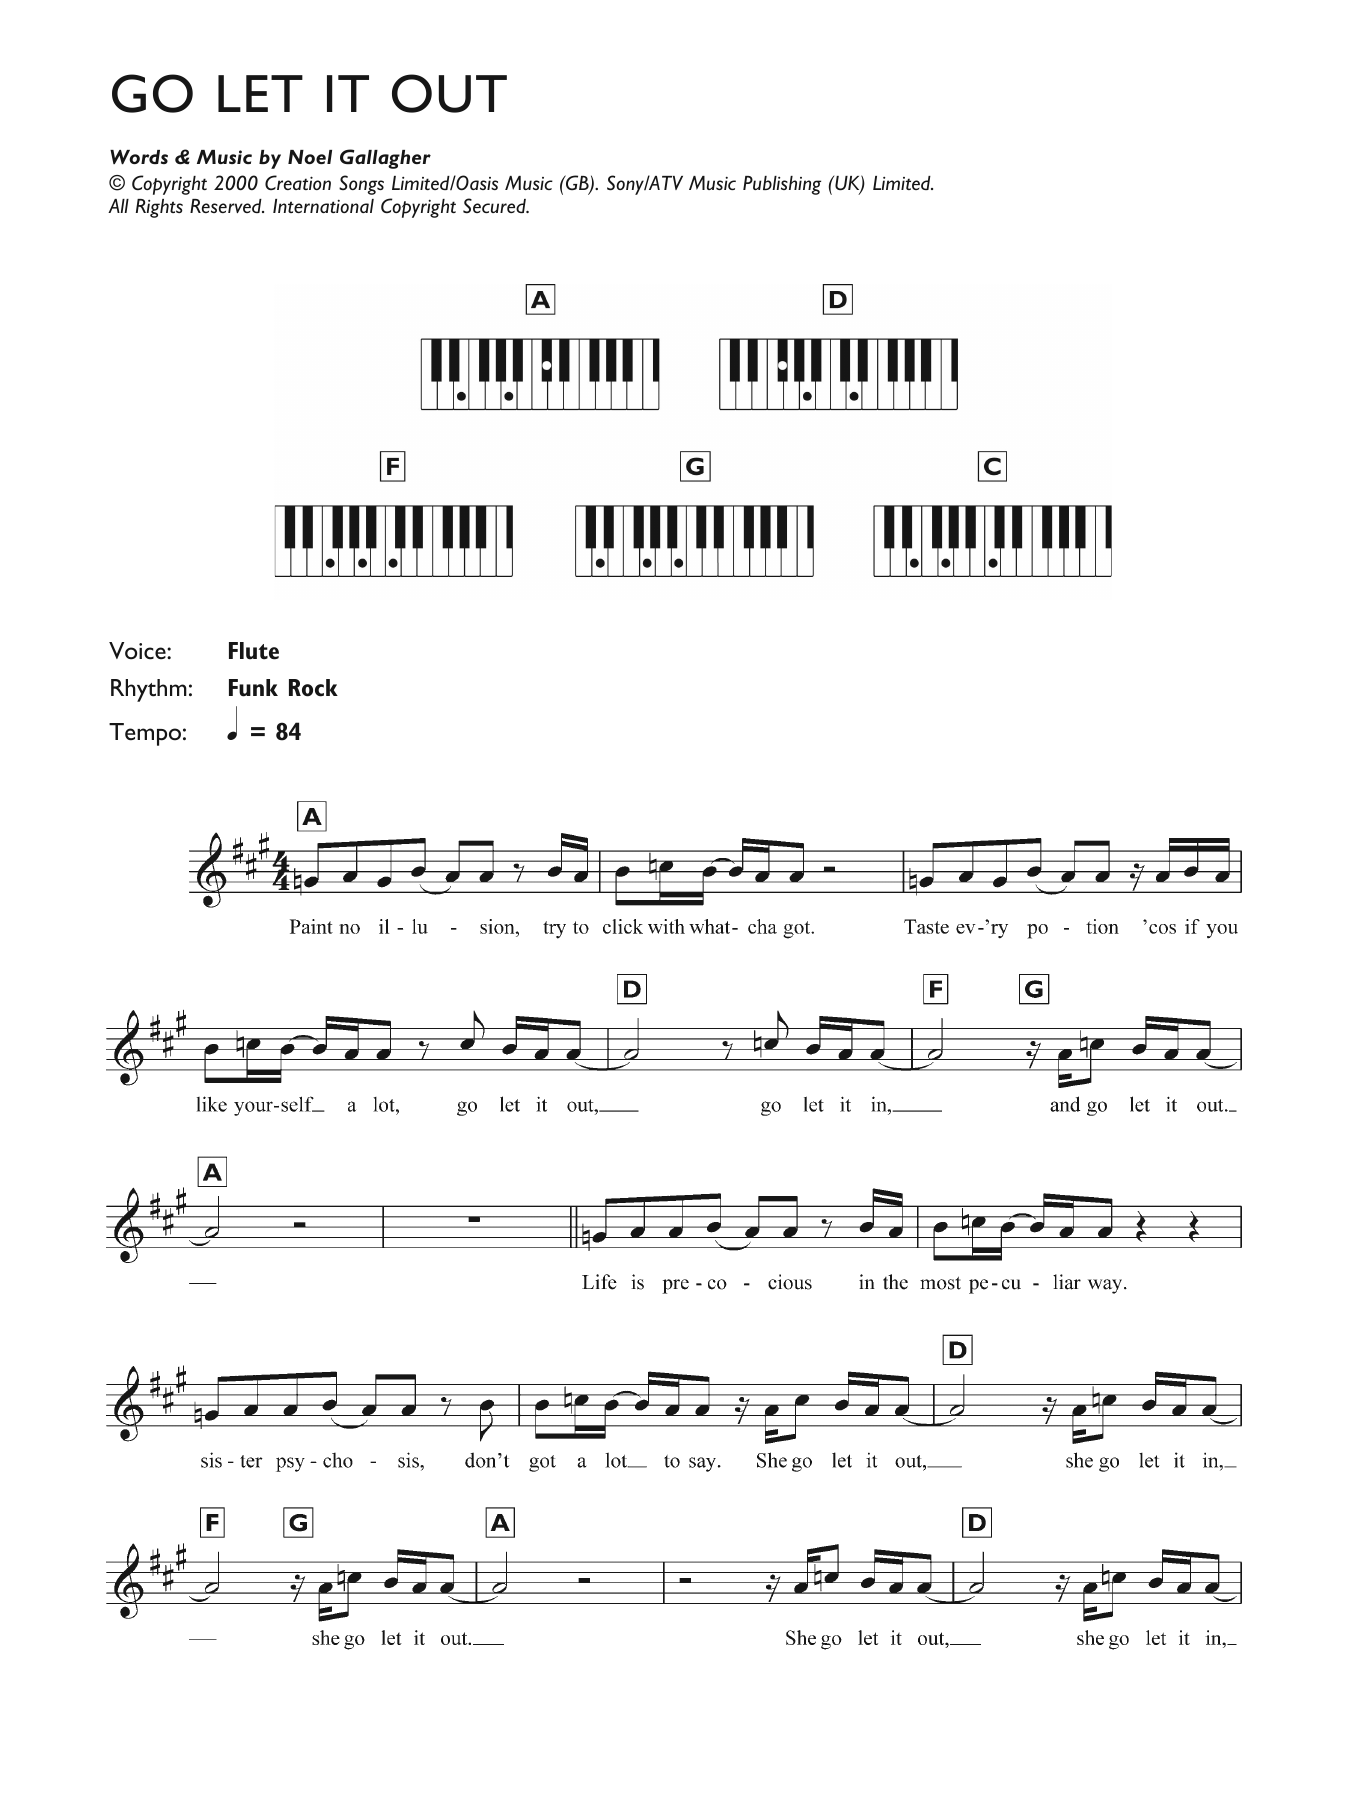 Download Oasis Go Let It Out Sheet Music